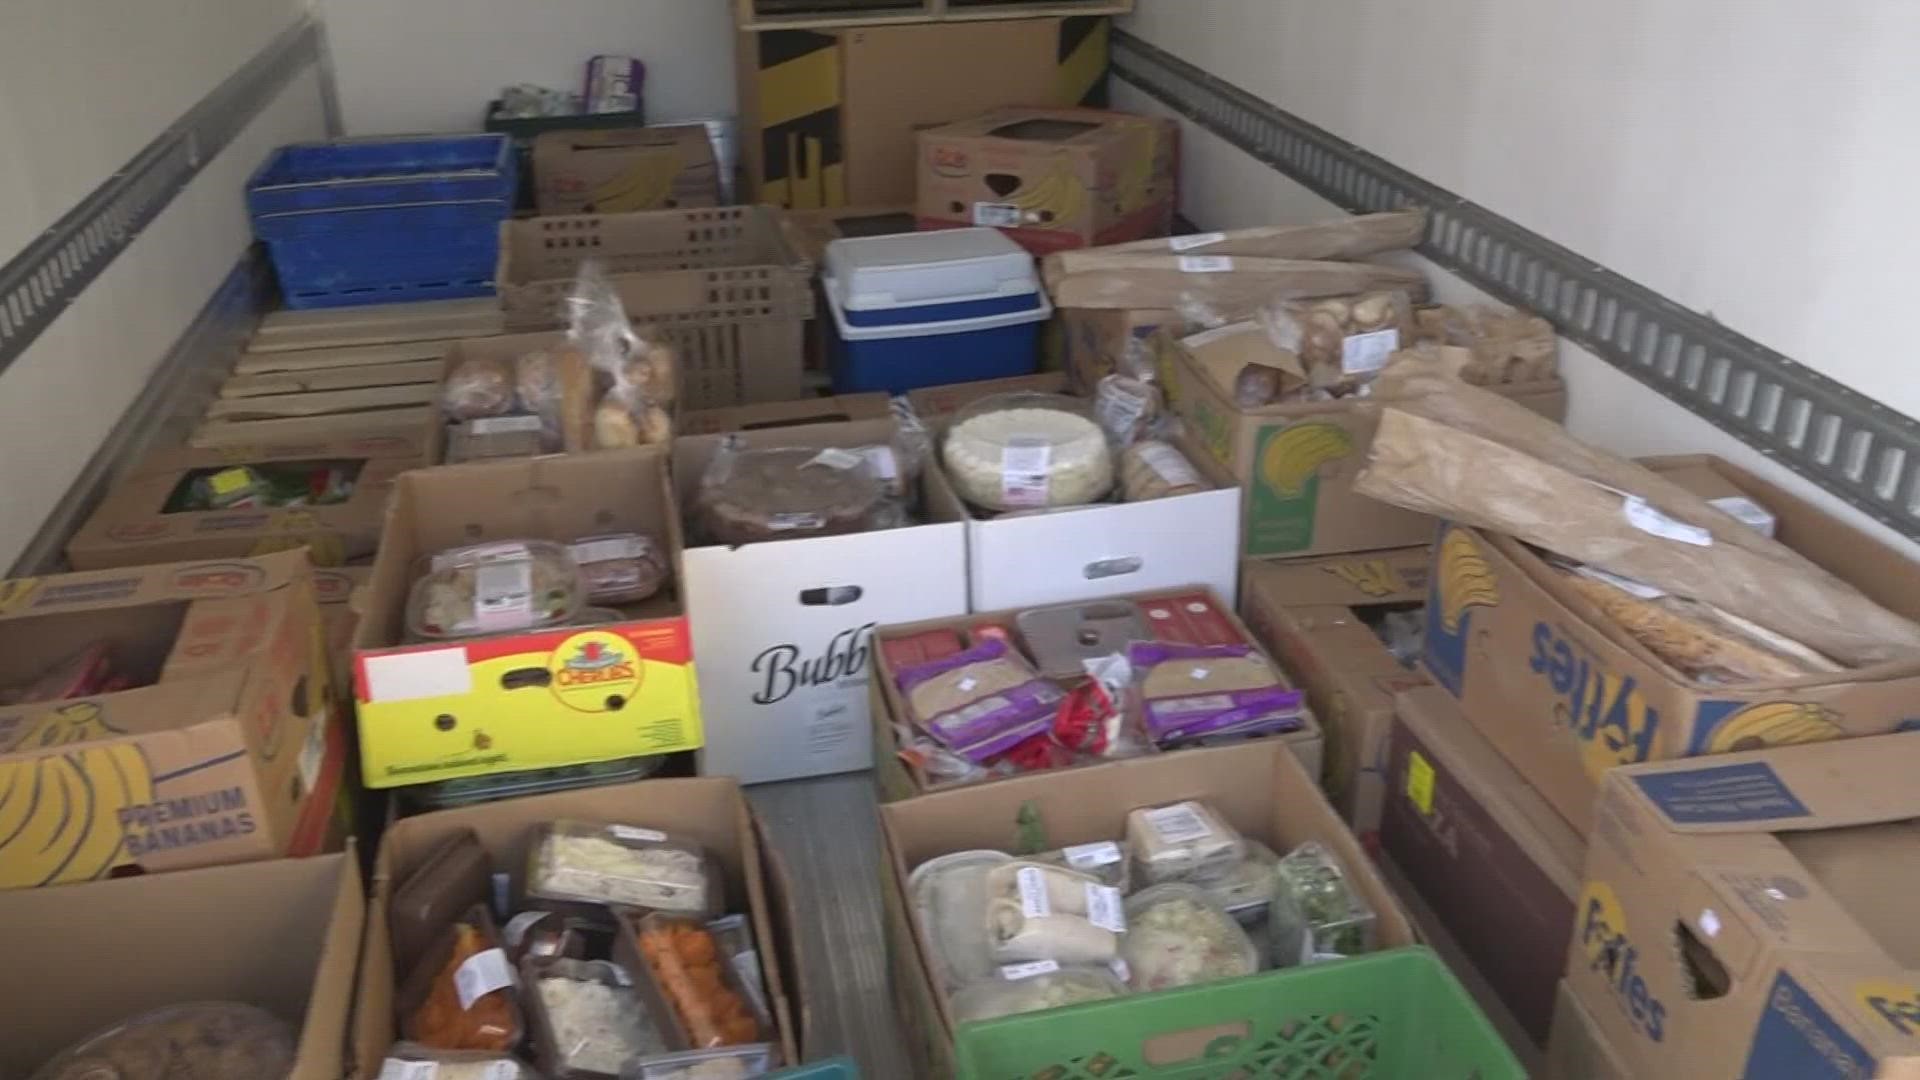 A man known as "Ragu the Plumber" now spends his time saving thousands of pounds of food from going to waste.